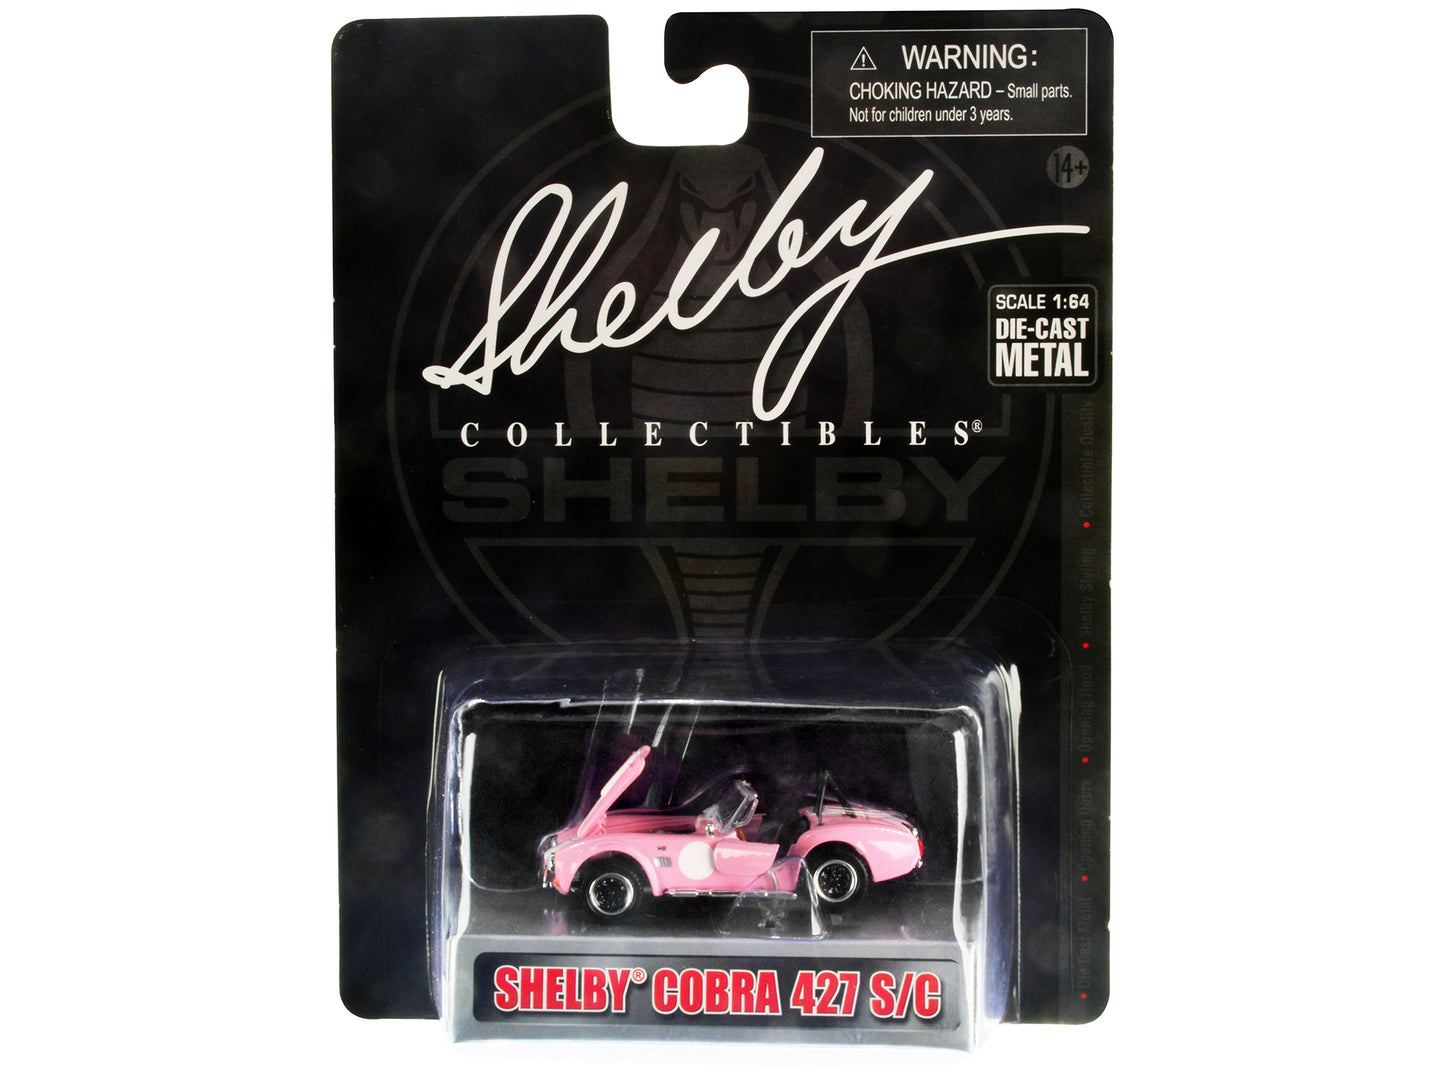 Shelby Collectibles Shelby Cobra 427 S/C Pink 1:64